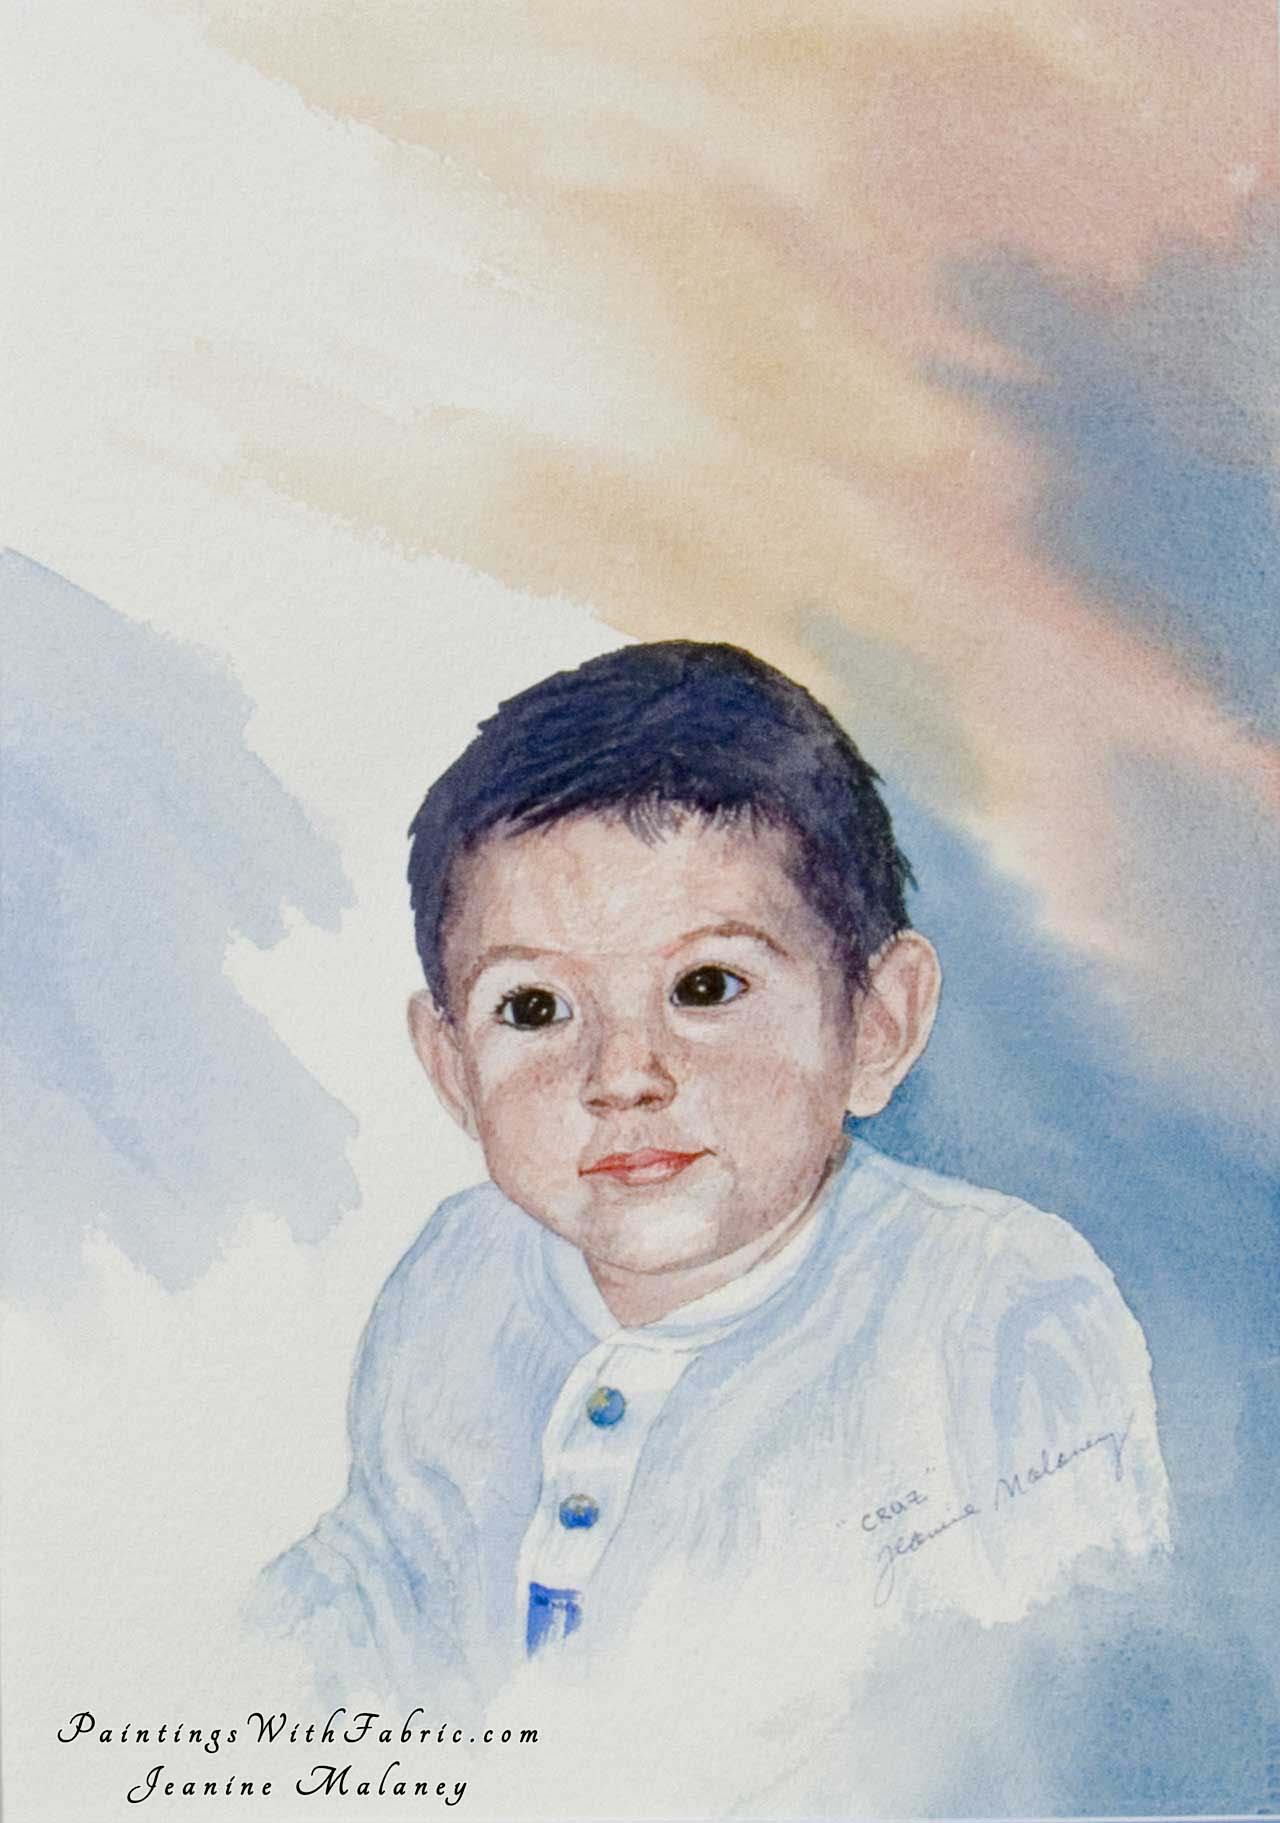 Cruz Unframed Original Watercolor Painting of a portrait of a young boy